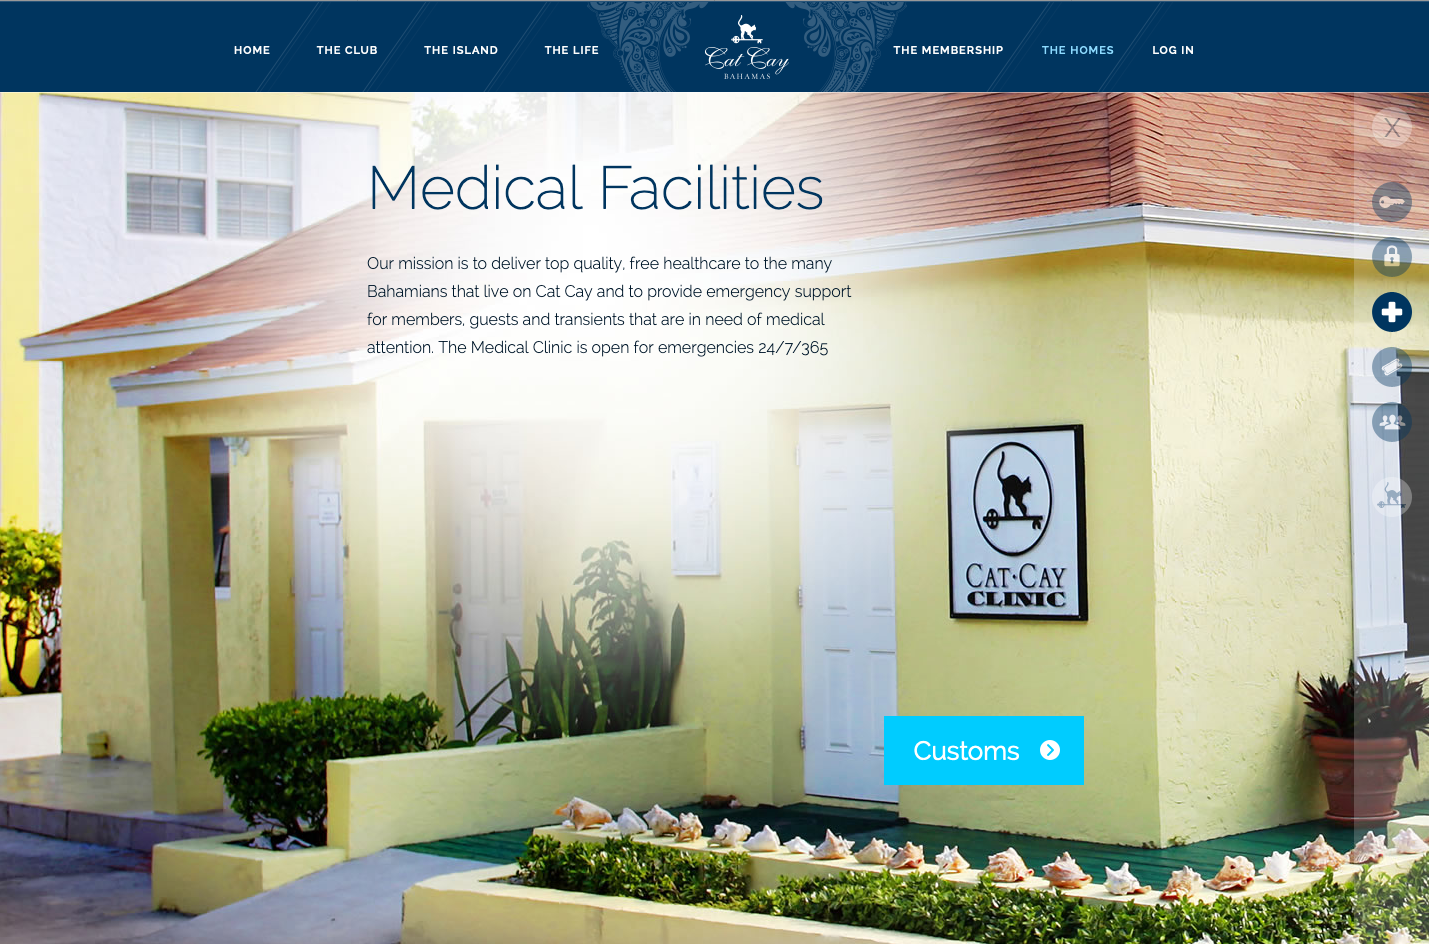 Part of the family-focused interactive tour showcases the unique benefit of a medical facility.